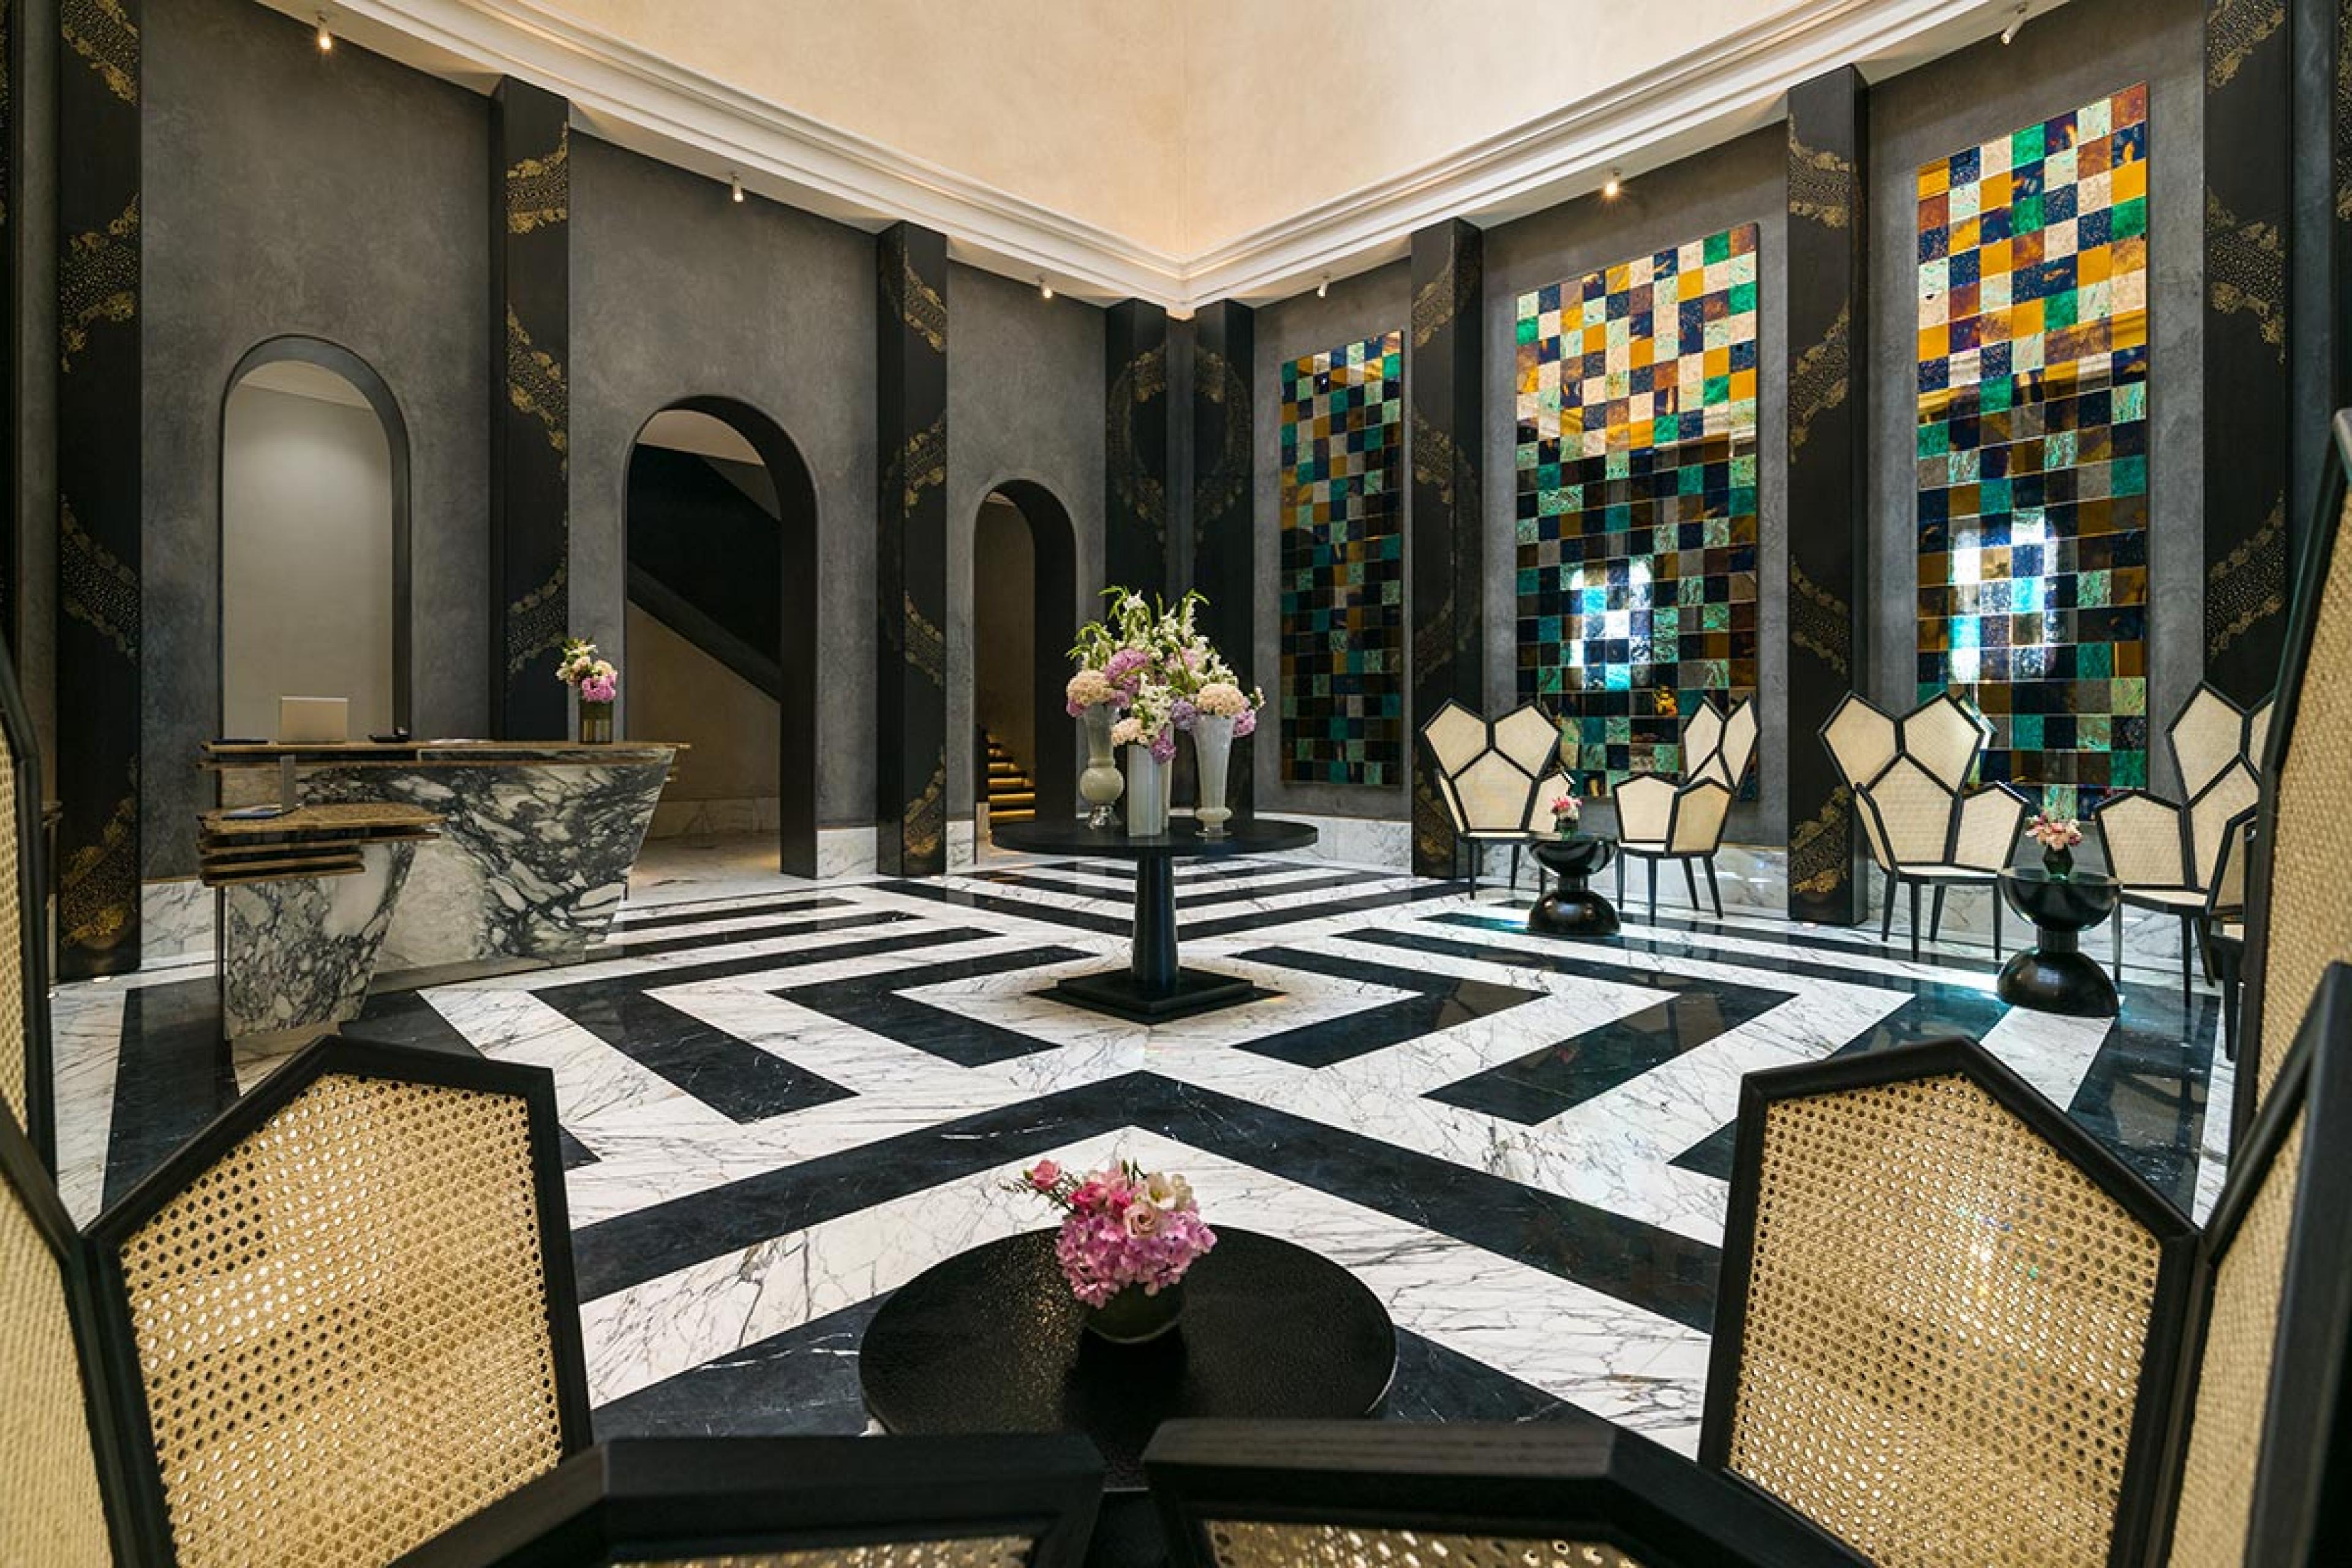 grand moroccan hotel lobby with black and white stone floor 